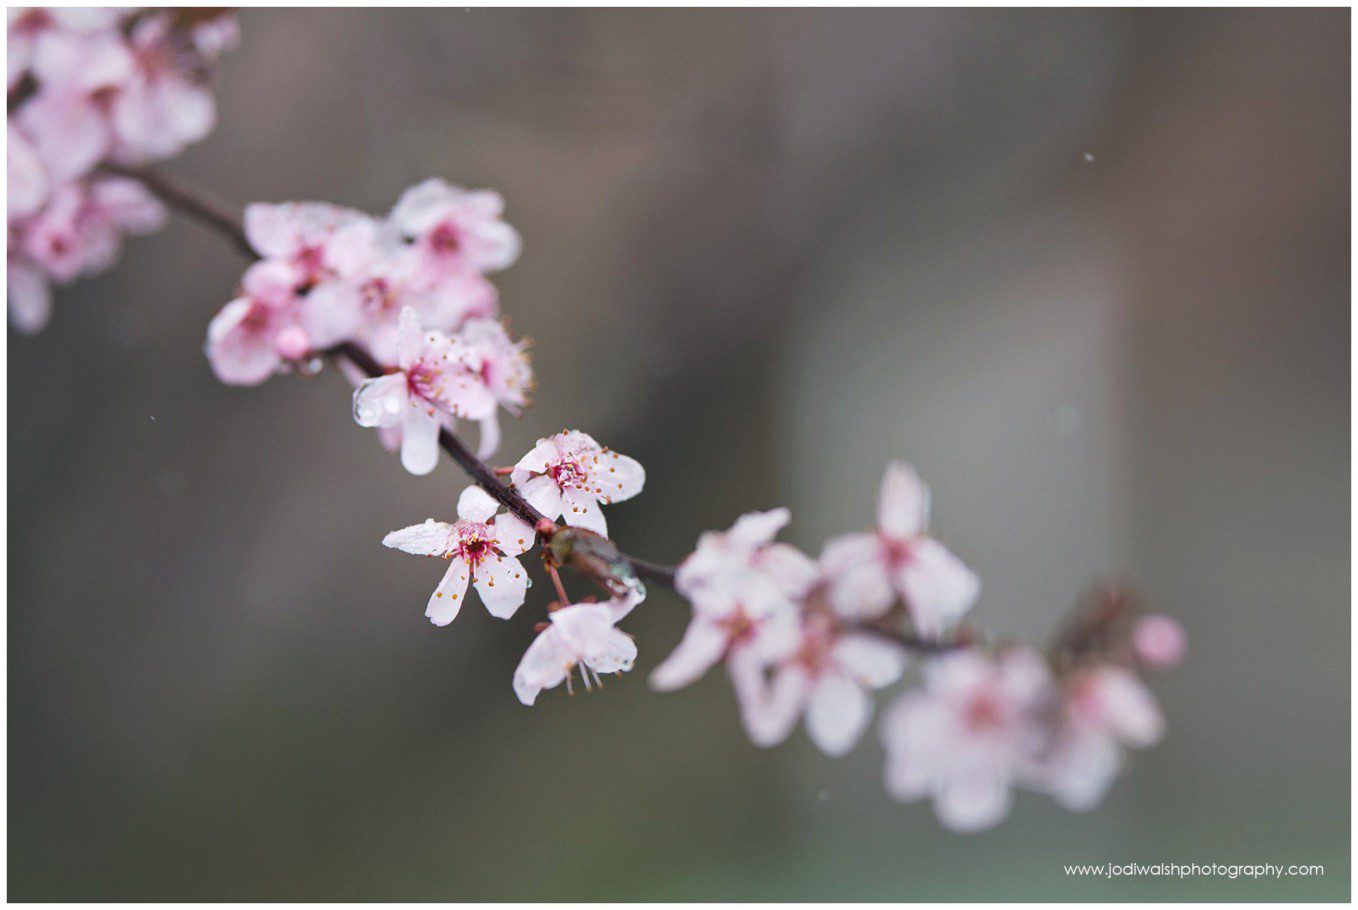 image of a crab apple blossoms with tiny snowflakes on them. The blossoms are small and light pink.